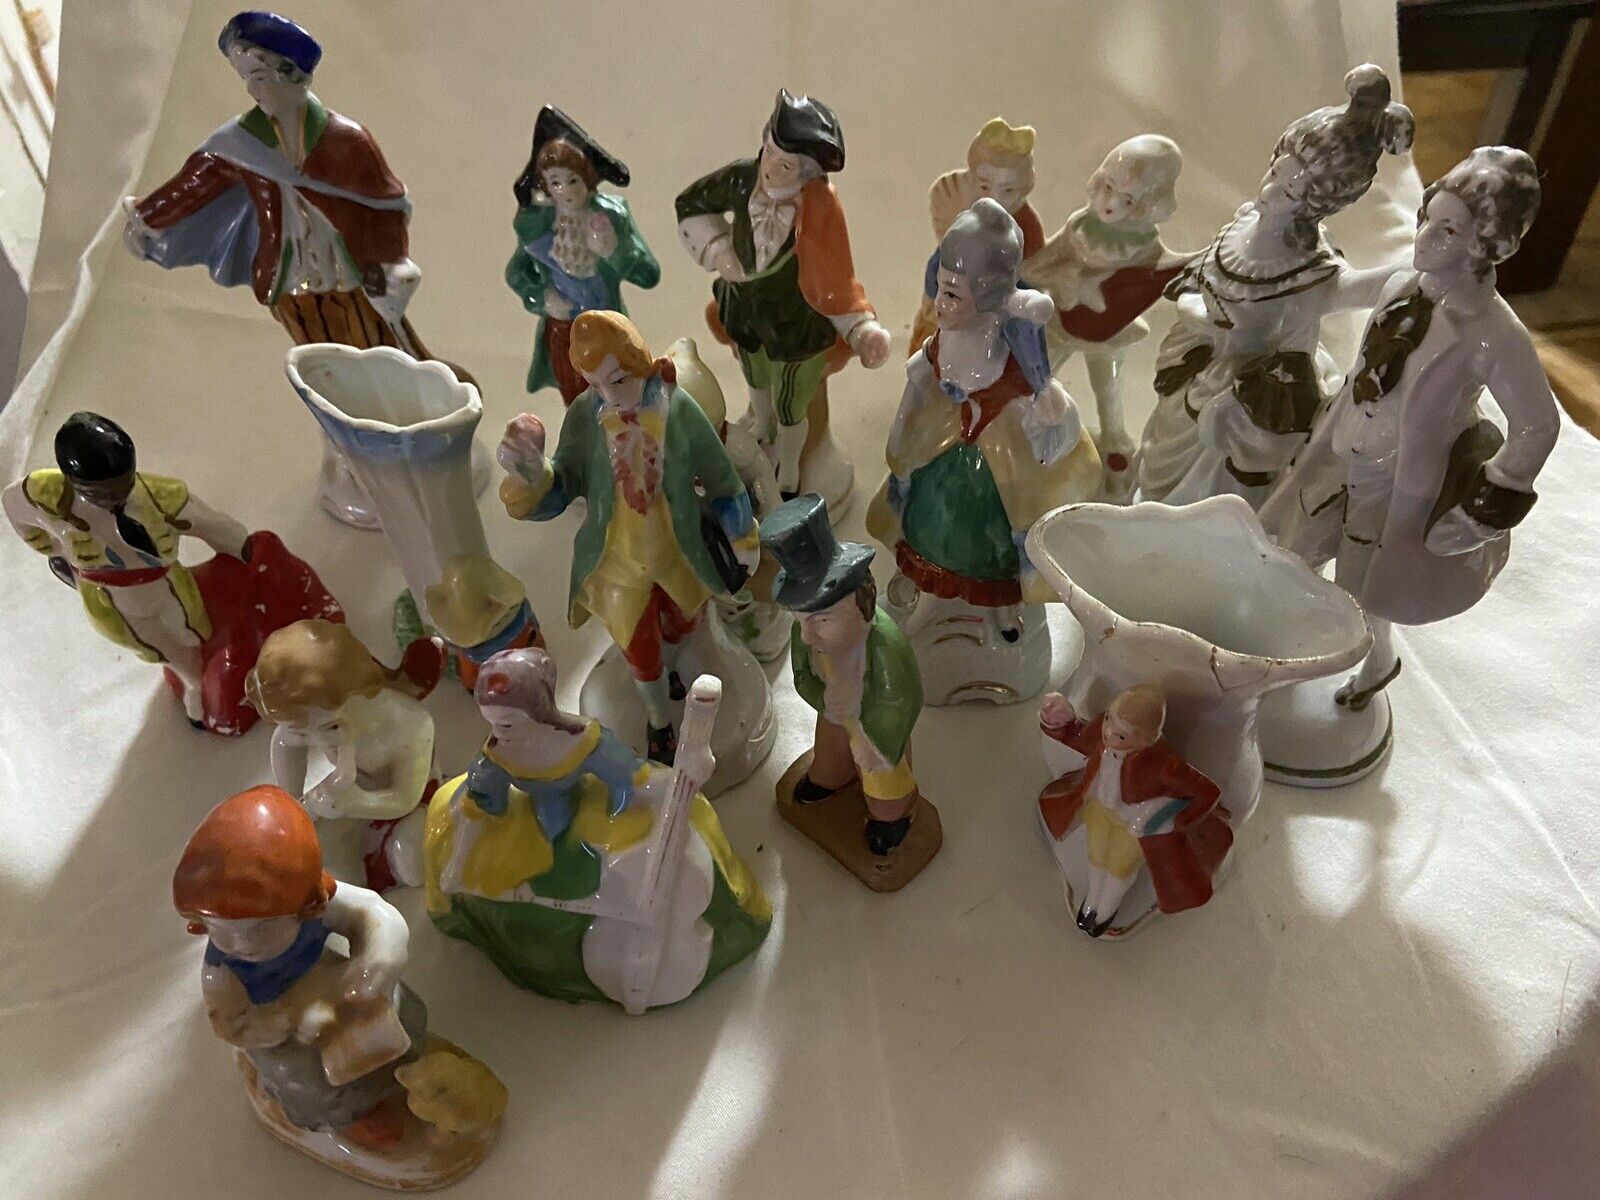 15 Small Vintage Figurines, Probably All Made In Japan, But Some Are Not Stamped